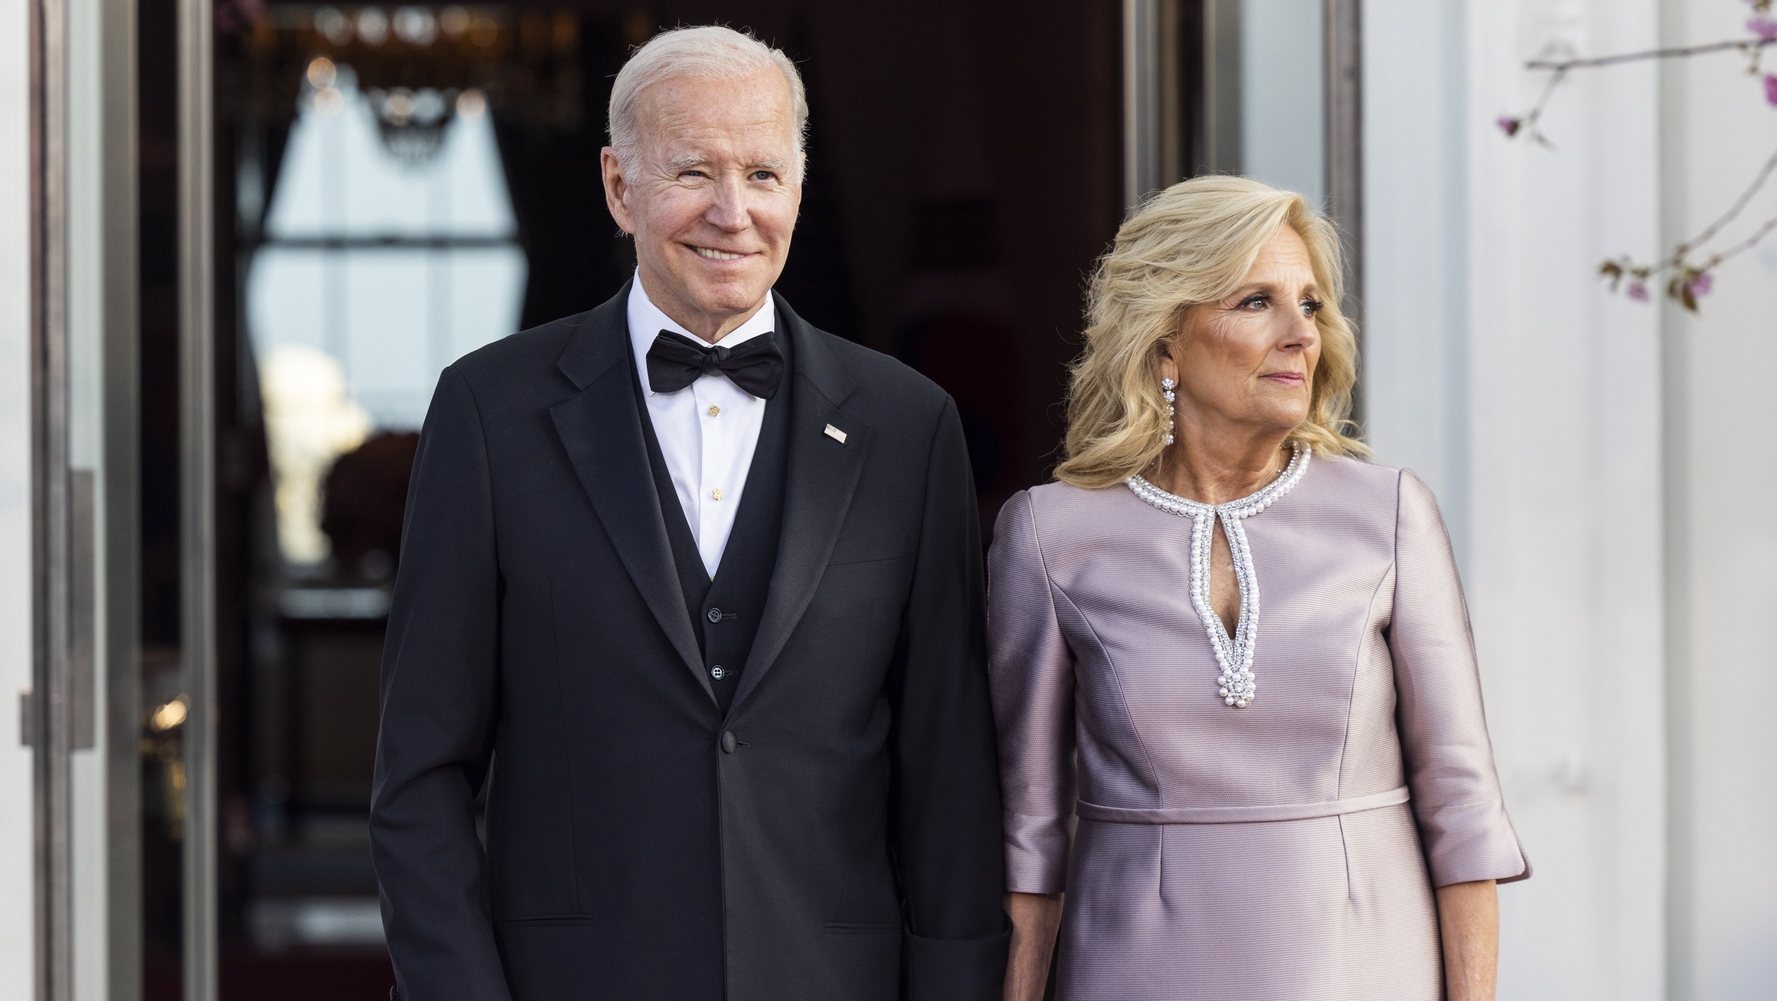 epa10593480 US President Joe Biden (L) and First Lady Jill Biden (R) prepare to welcome South Korean President Yoon Suk Yeol and his wife Kim Keon Hee to the North Portico of the White House for their state dinner in Washington, DC, USA, 26 April 2023. Yoon is on the second day of a three-day visit to DC, which includes addressing a joint meeting of Congress and a tour of NASA’s Goddard Space Flight Center.  EPA/JIM LO SCALZO